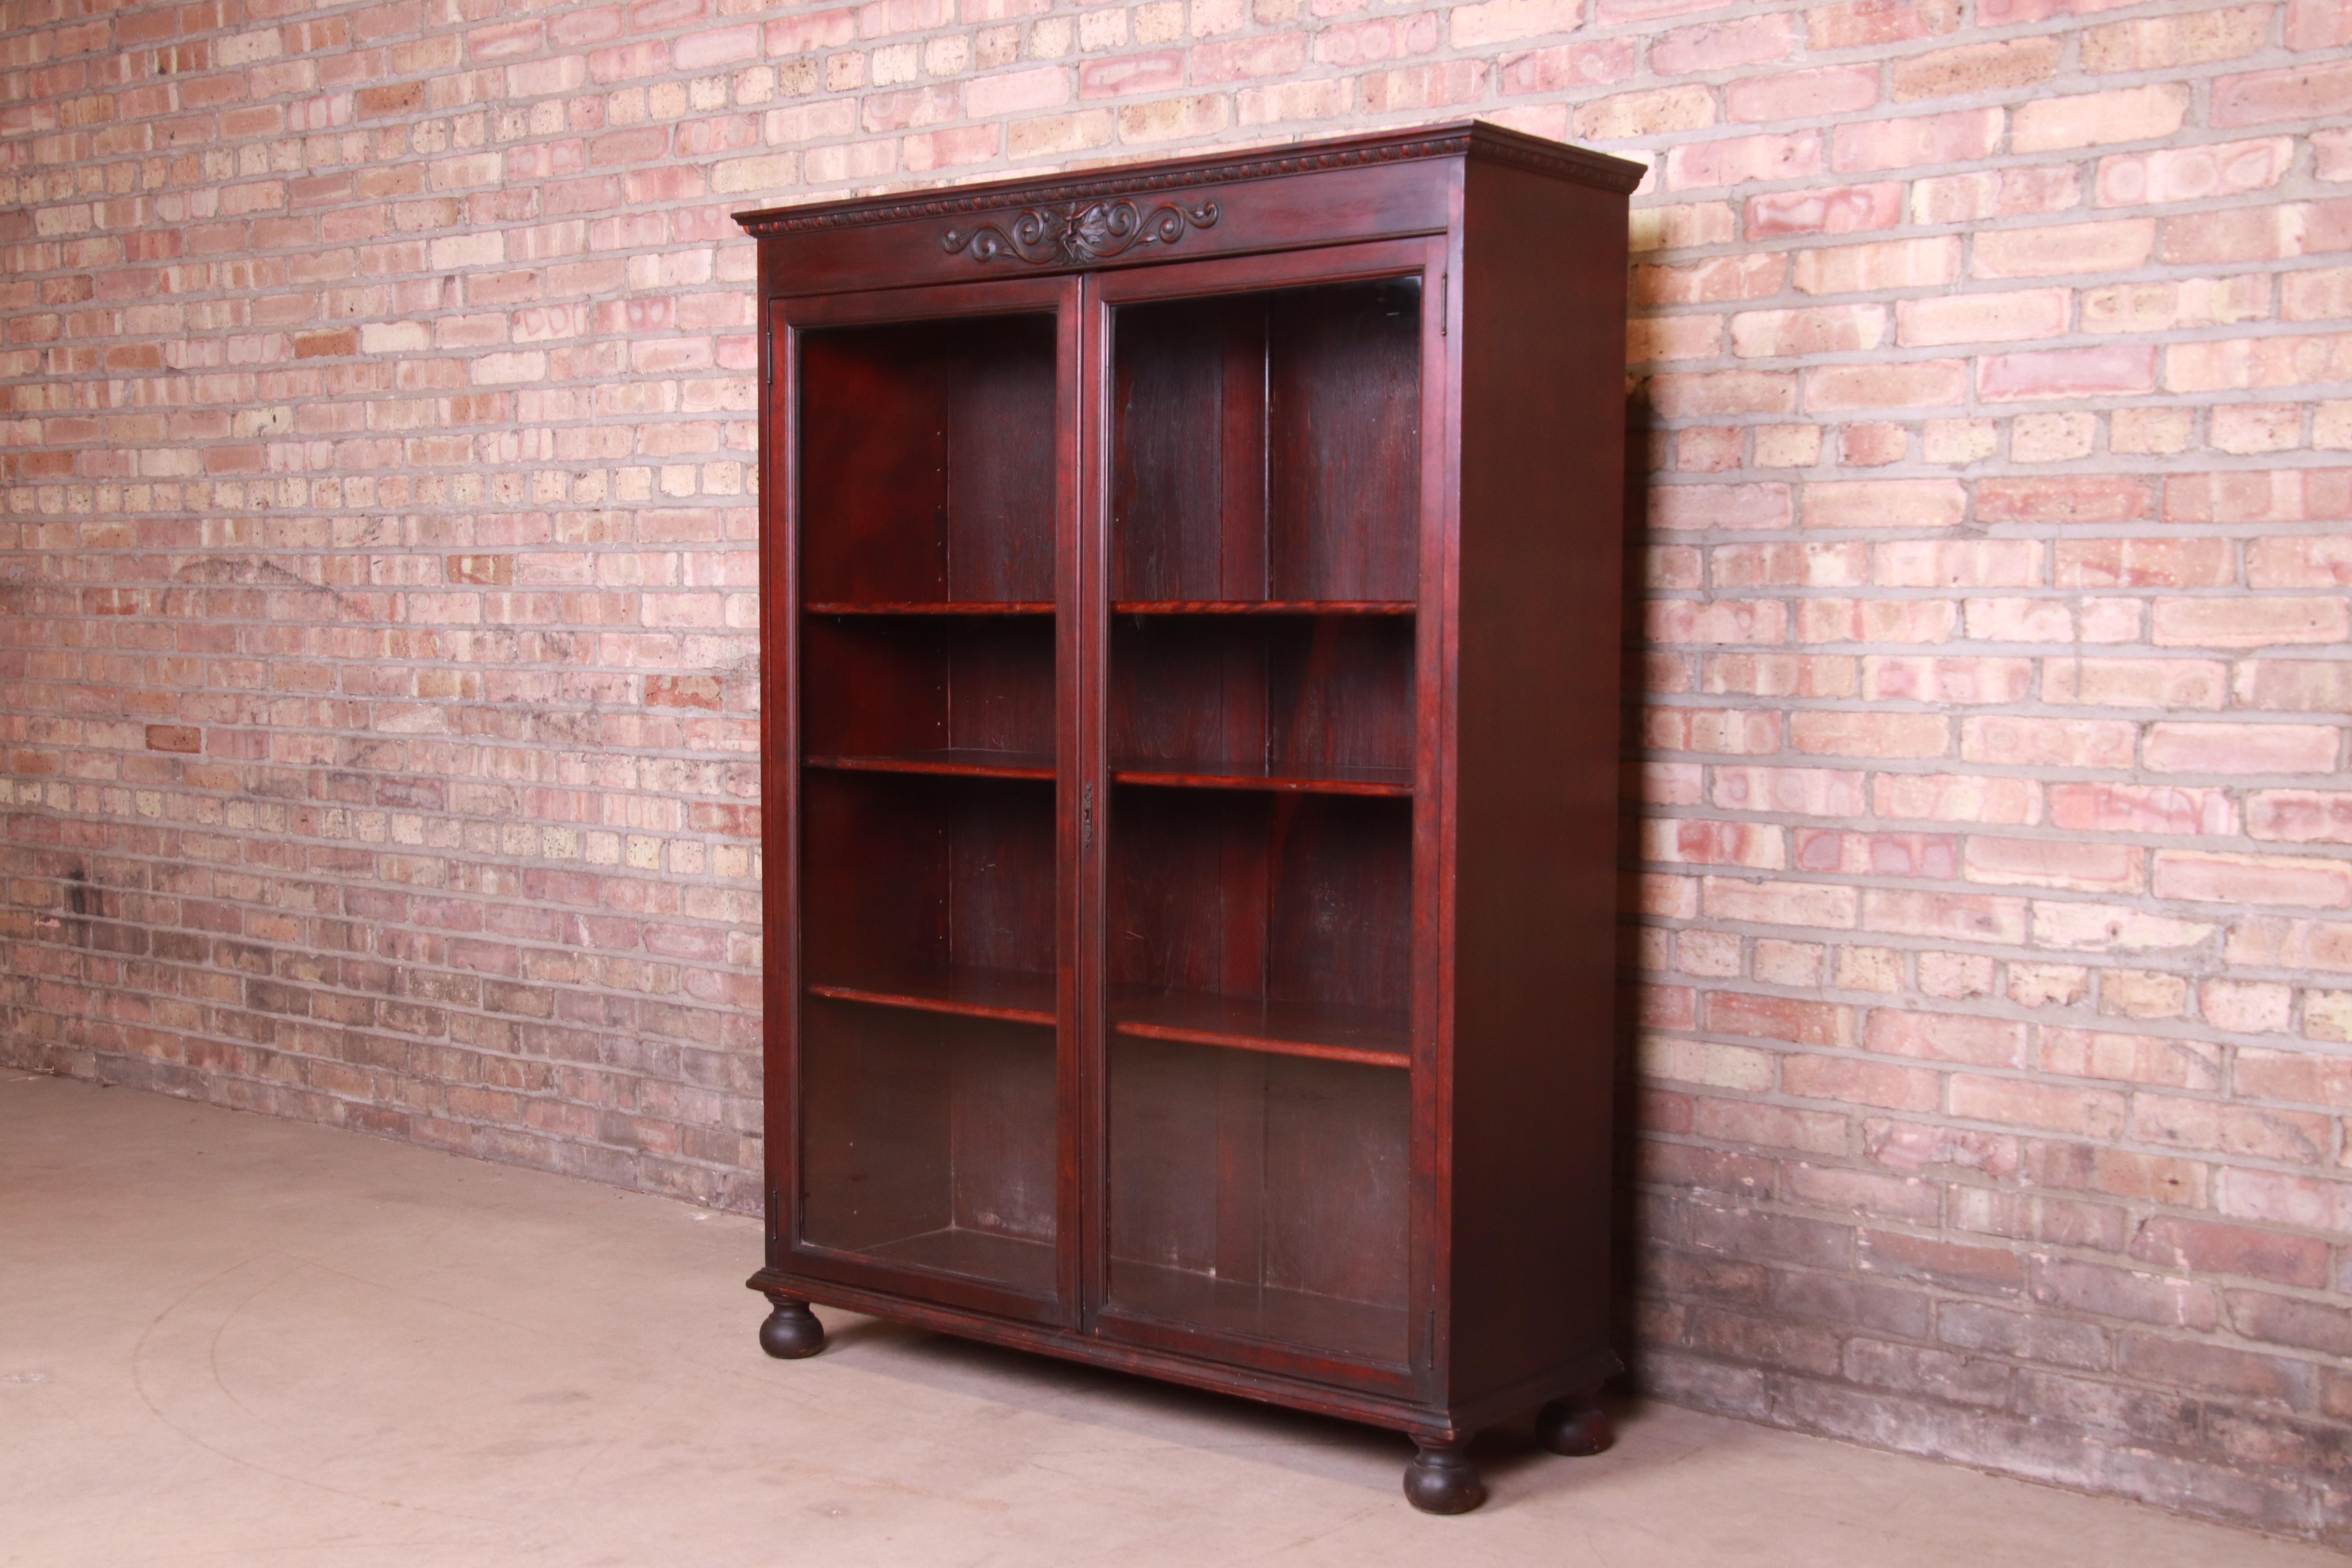 A gorgeous antique Victorian glass front bookcase with Old Man of the North carved face

USA, circa 1890

Carved mahogany, with glass front doors.

Measures: 44.88